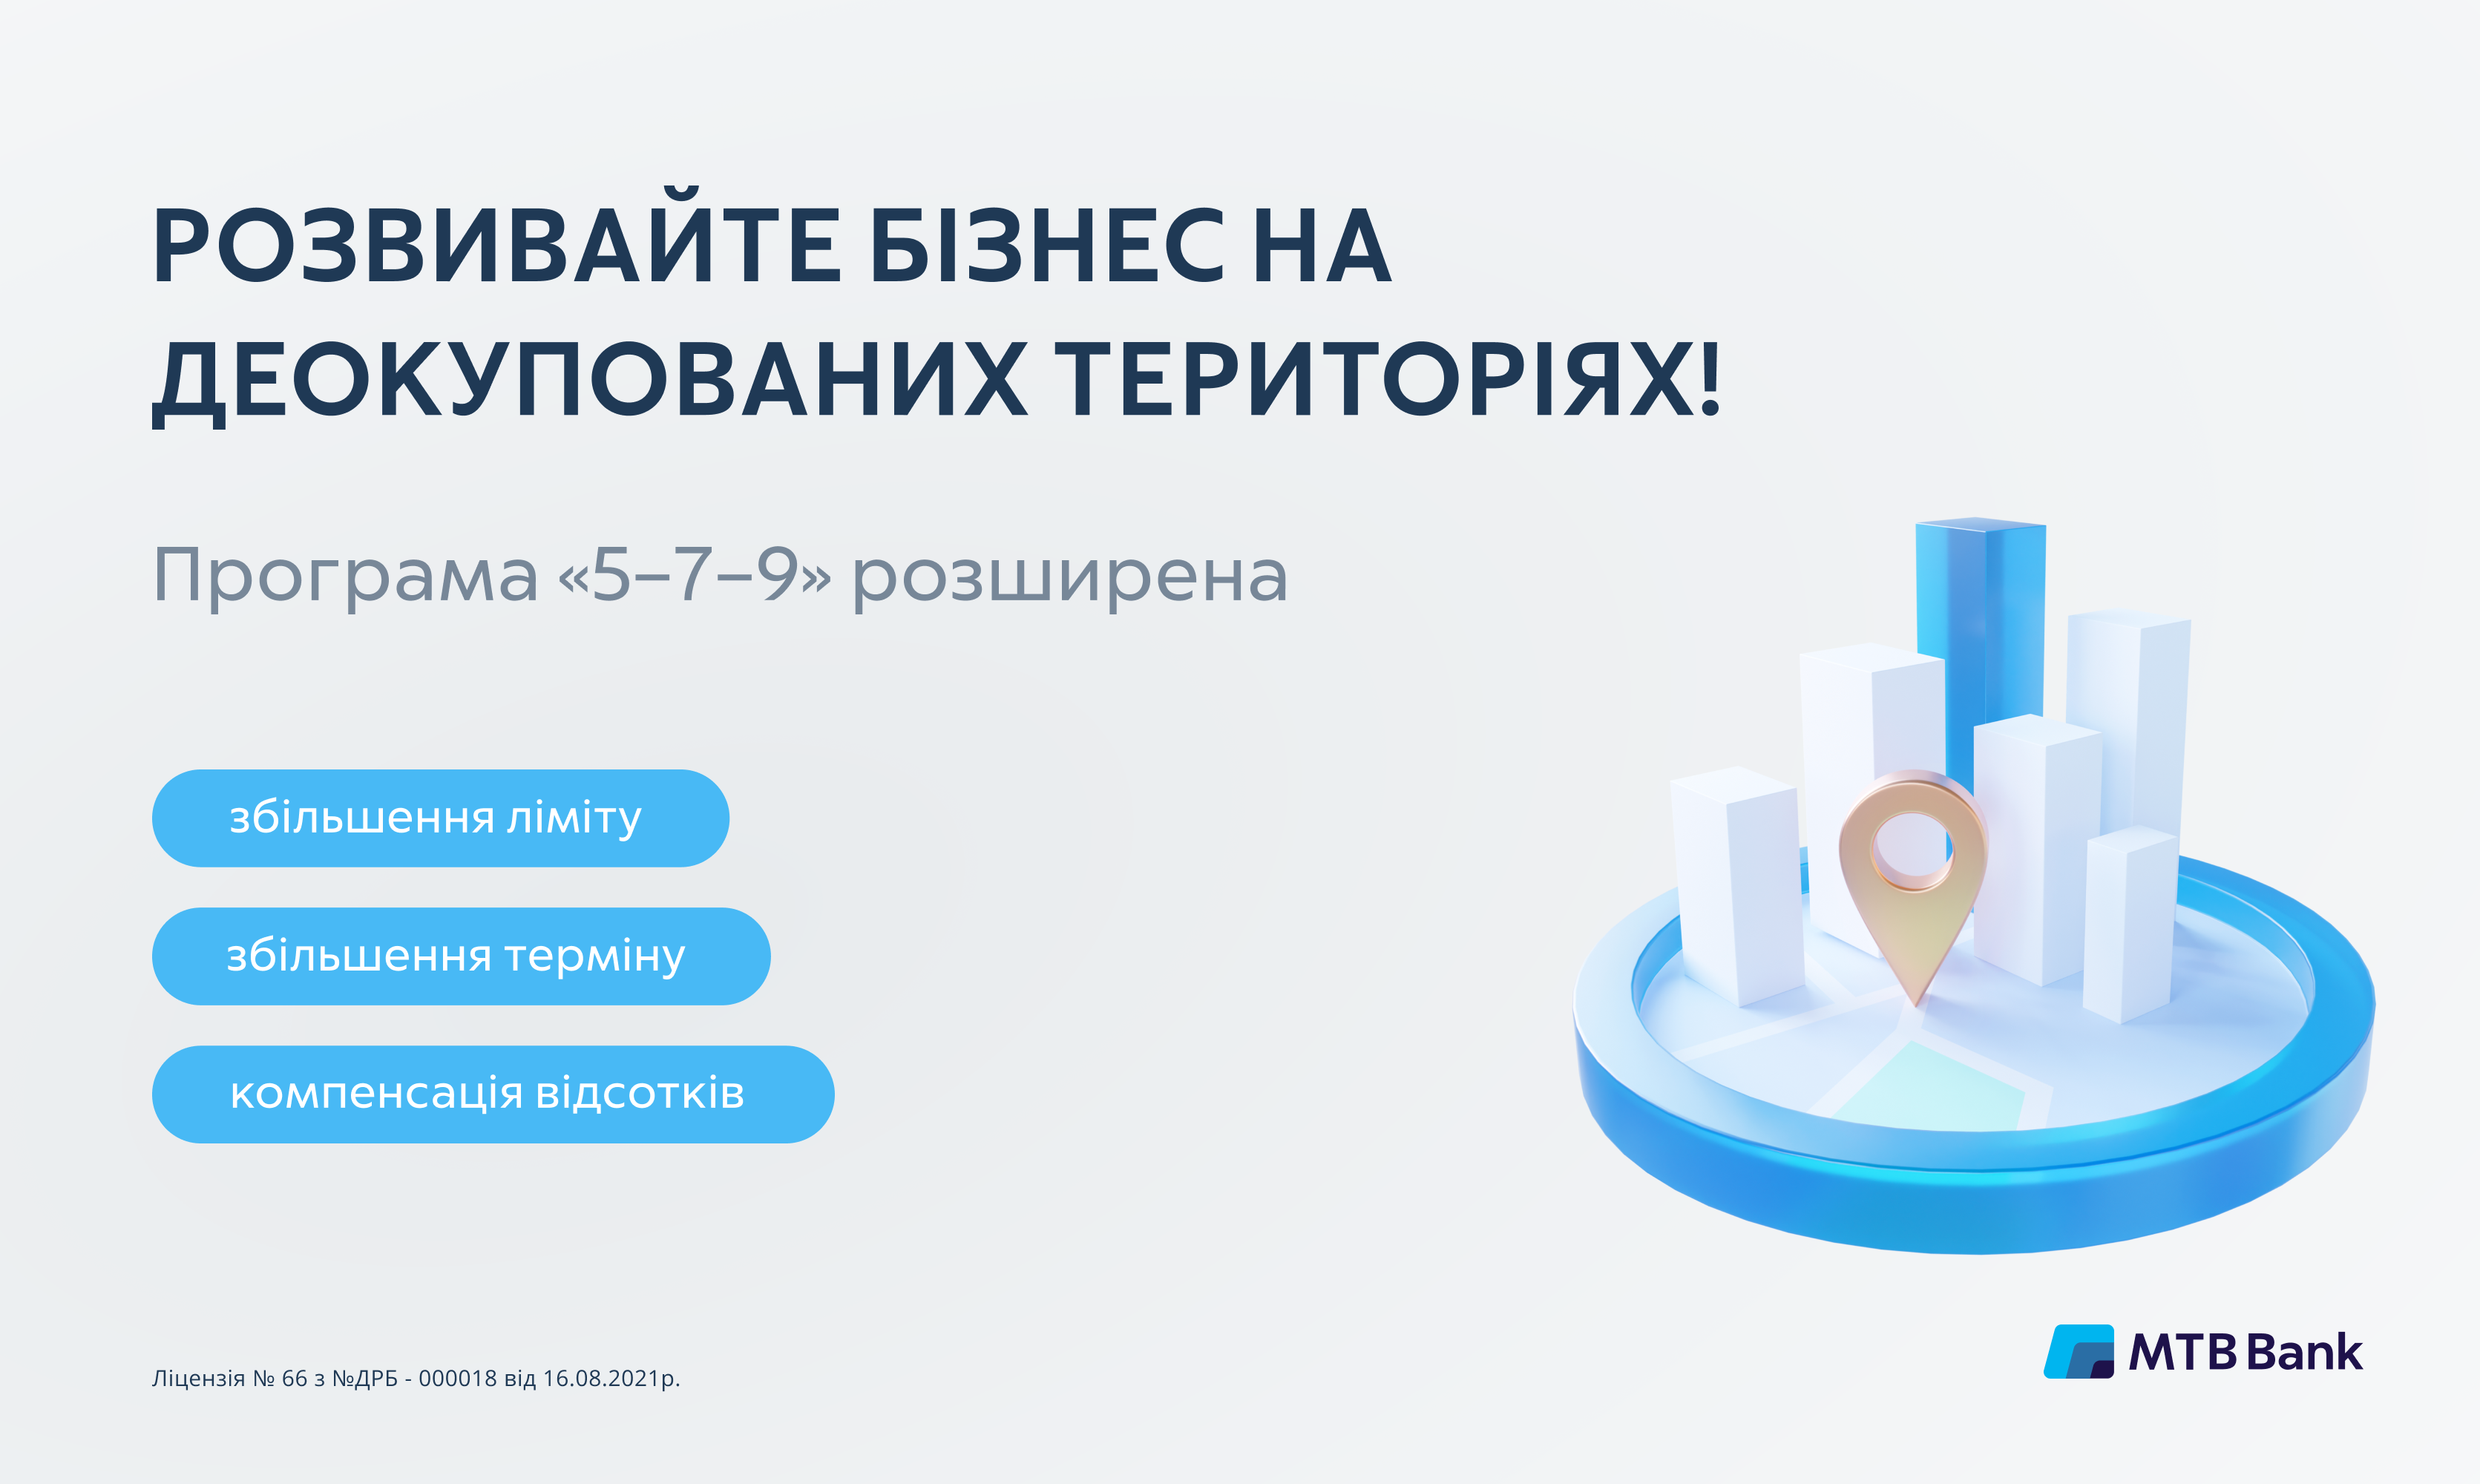 The program of affordable loans for business "5−7−9" has been expanded! - photo - mtb.ua